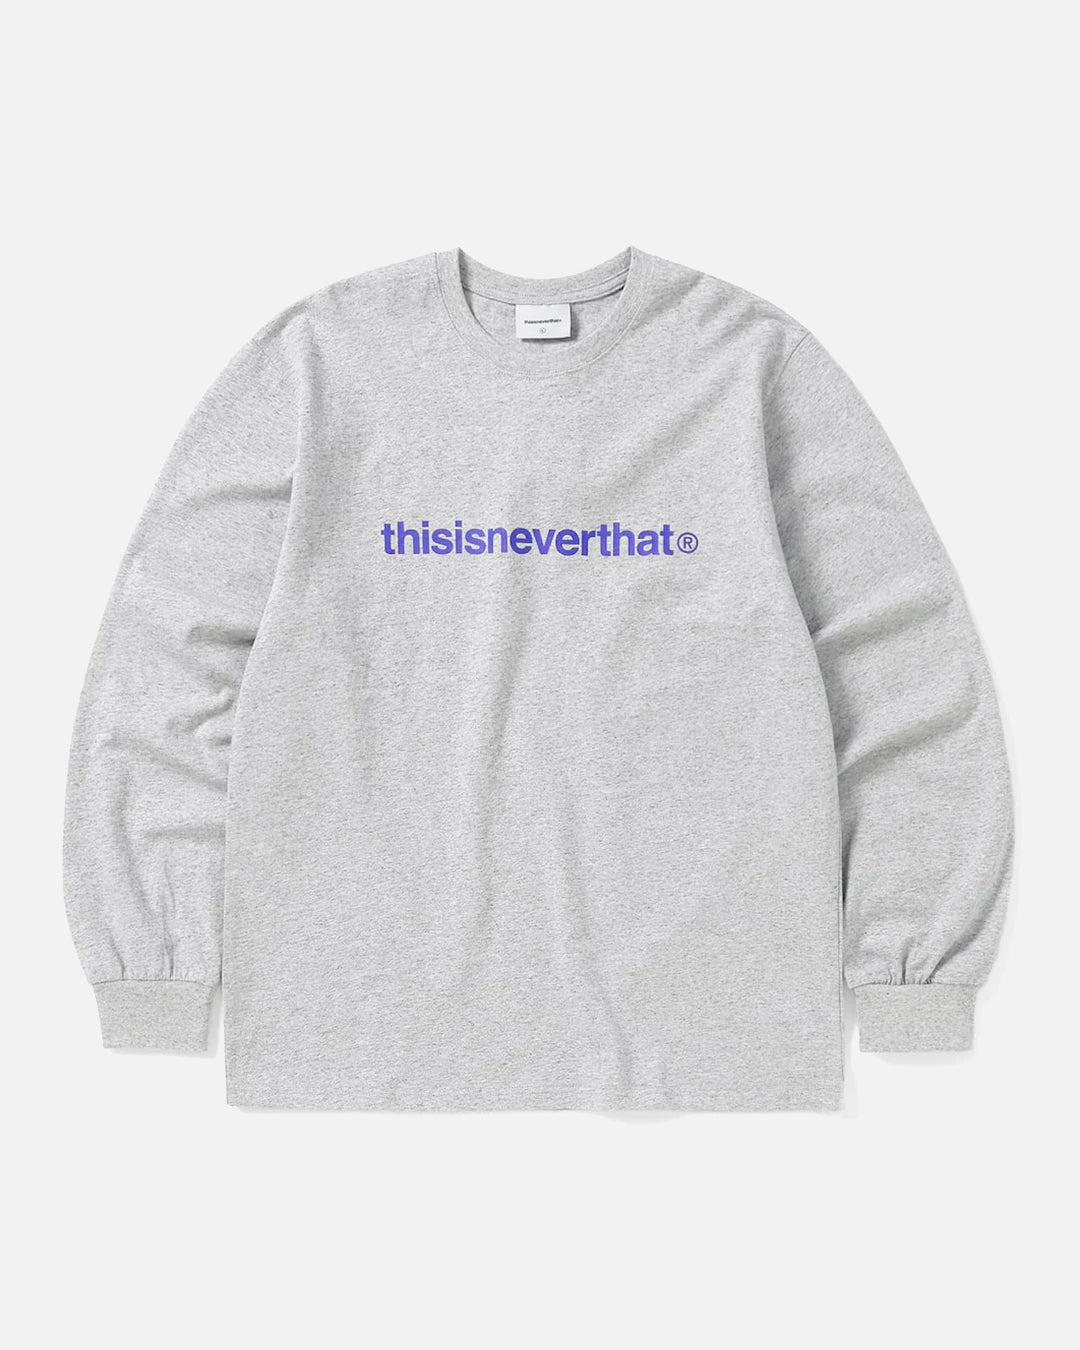 thisisneverthat T-Logo Grey Heather Tee | Store Blues L/S in